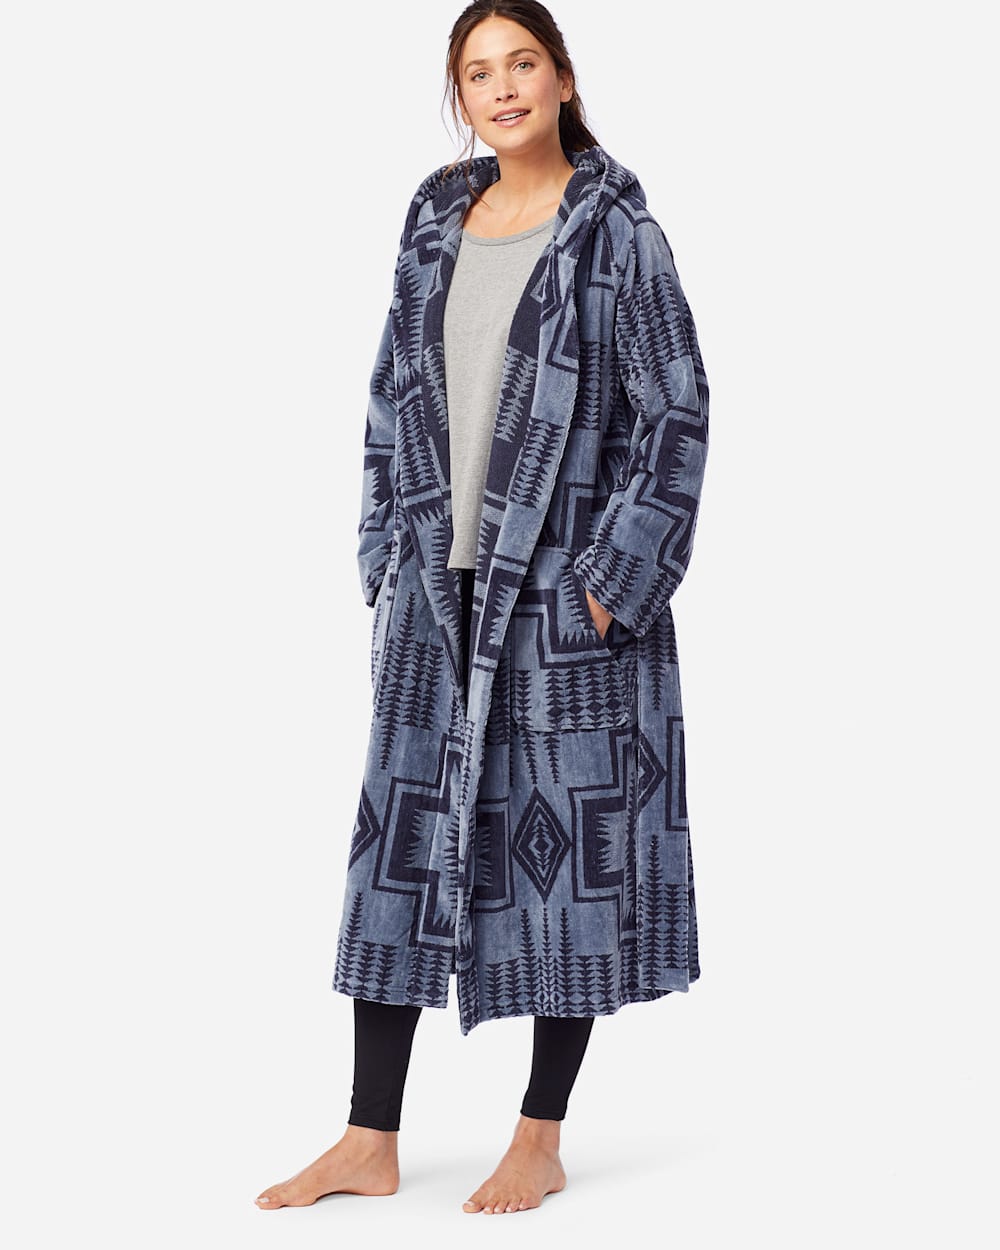 ALTERNATE VIEW OF WOMEN'S JACQUARD TERRY ROBE IN DUSK BLUE HARDING image number 3